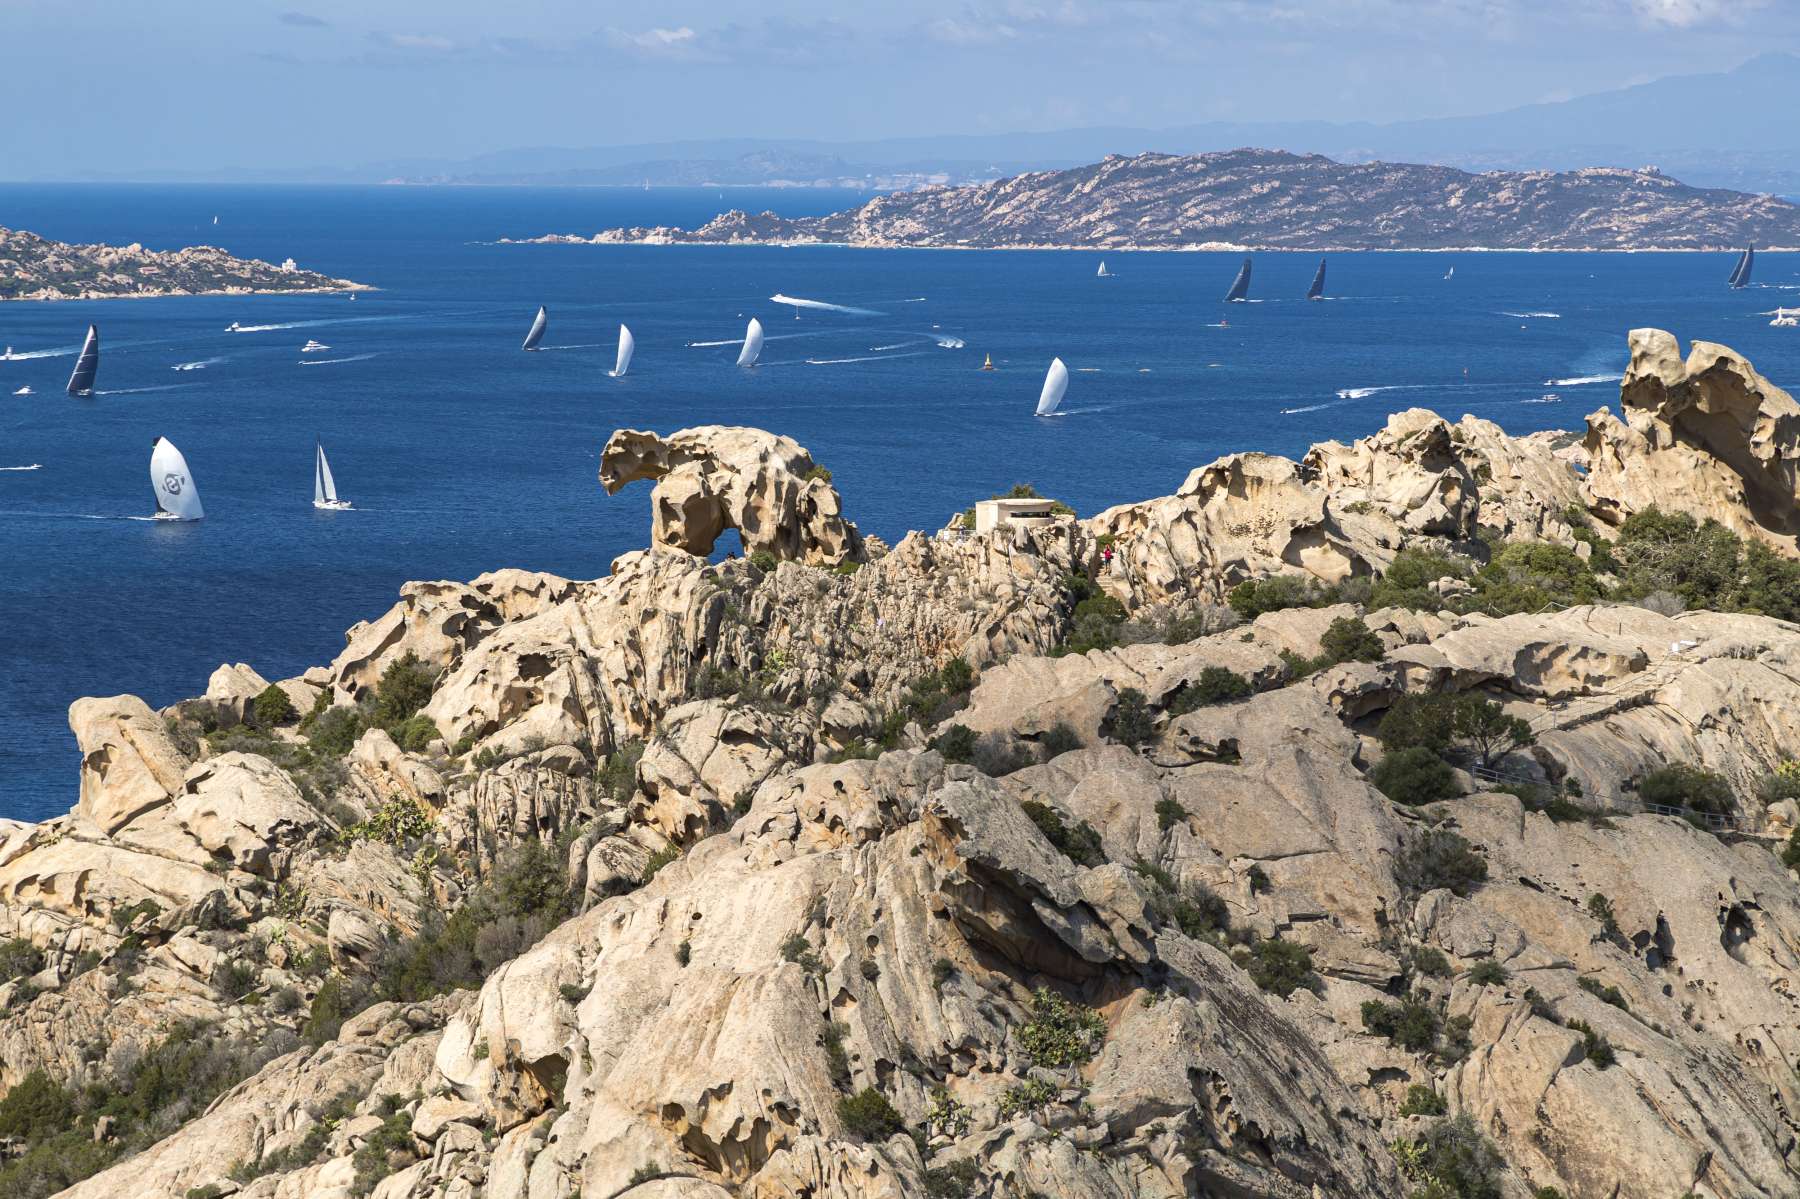 MAXI YACHT ROLEX CUP 2019 - IMAGES FROM DAY 5 ONLINE - NEWS - Yacht Club Costa Smeralda